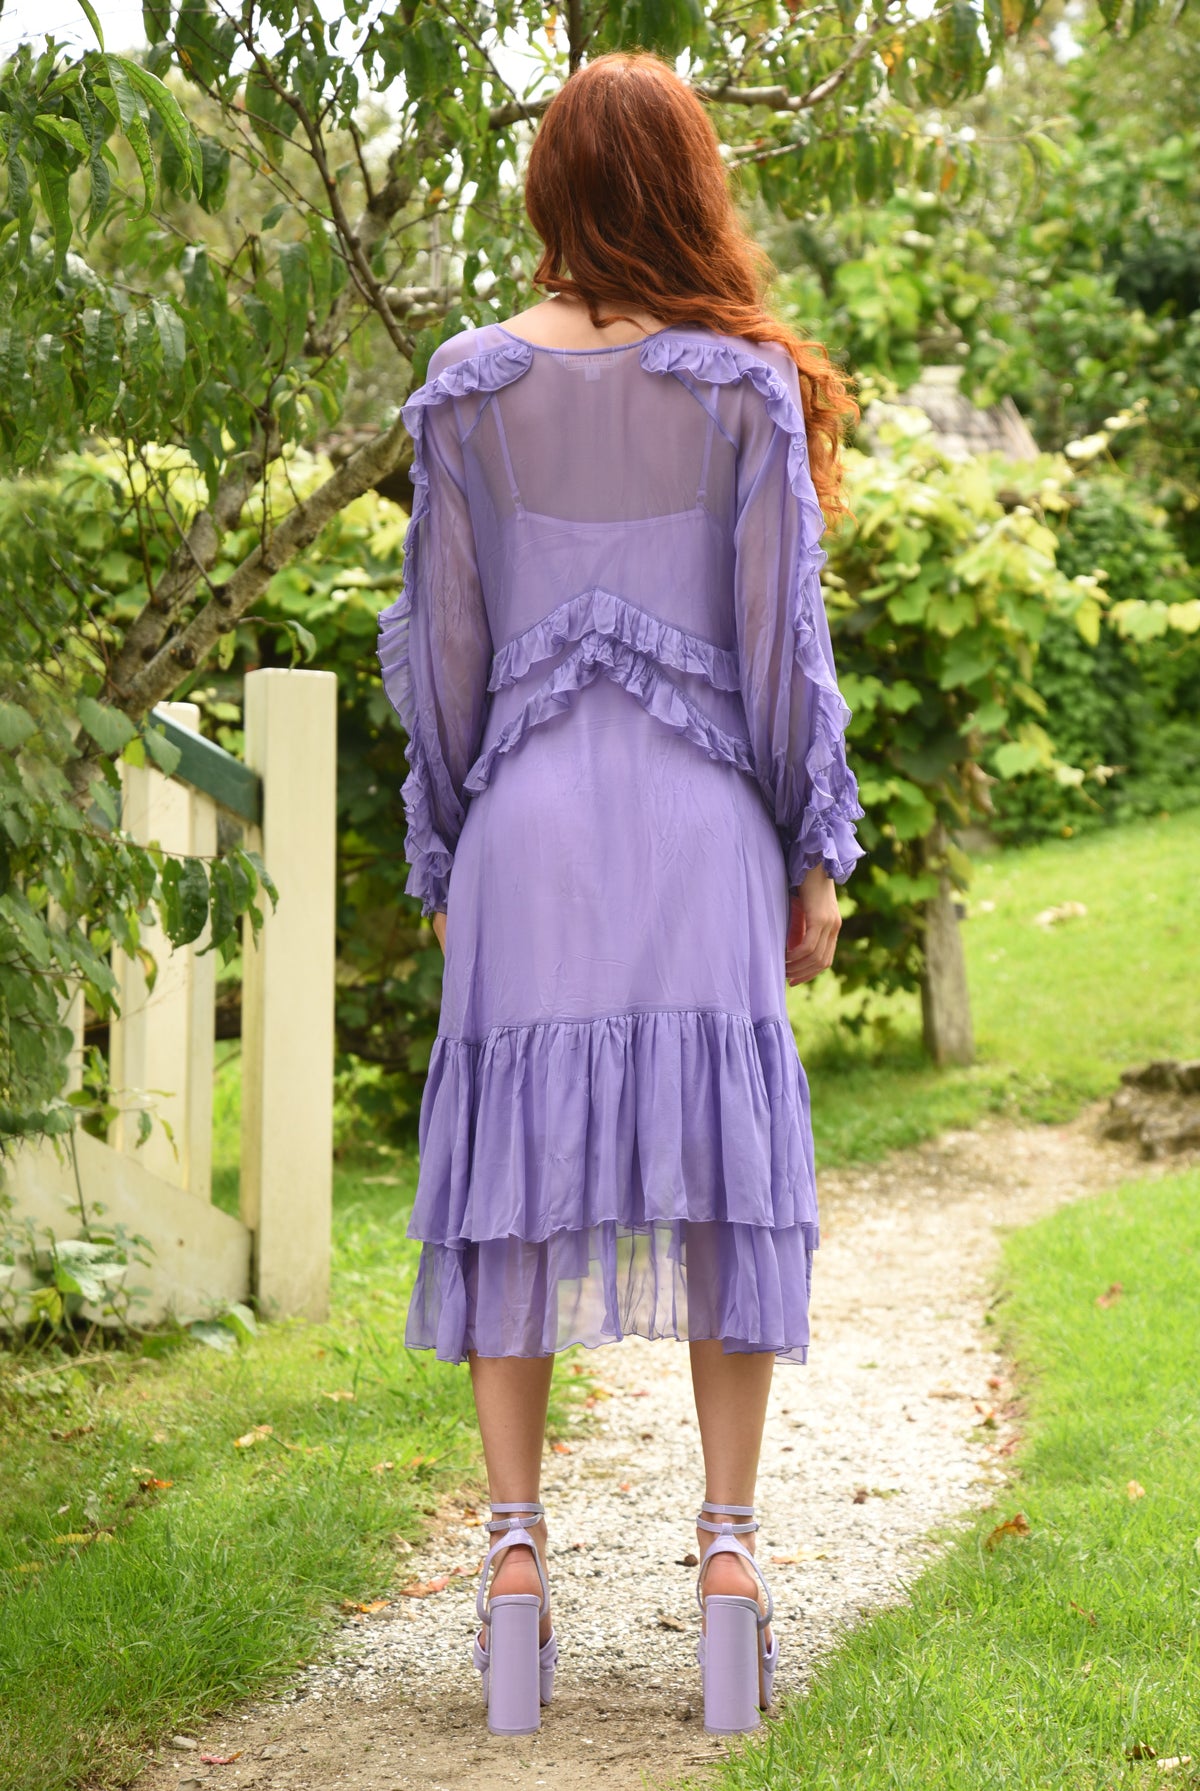 TRELISE COOPER Frill at Ease Dress - Lilac - Magpie Style